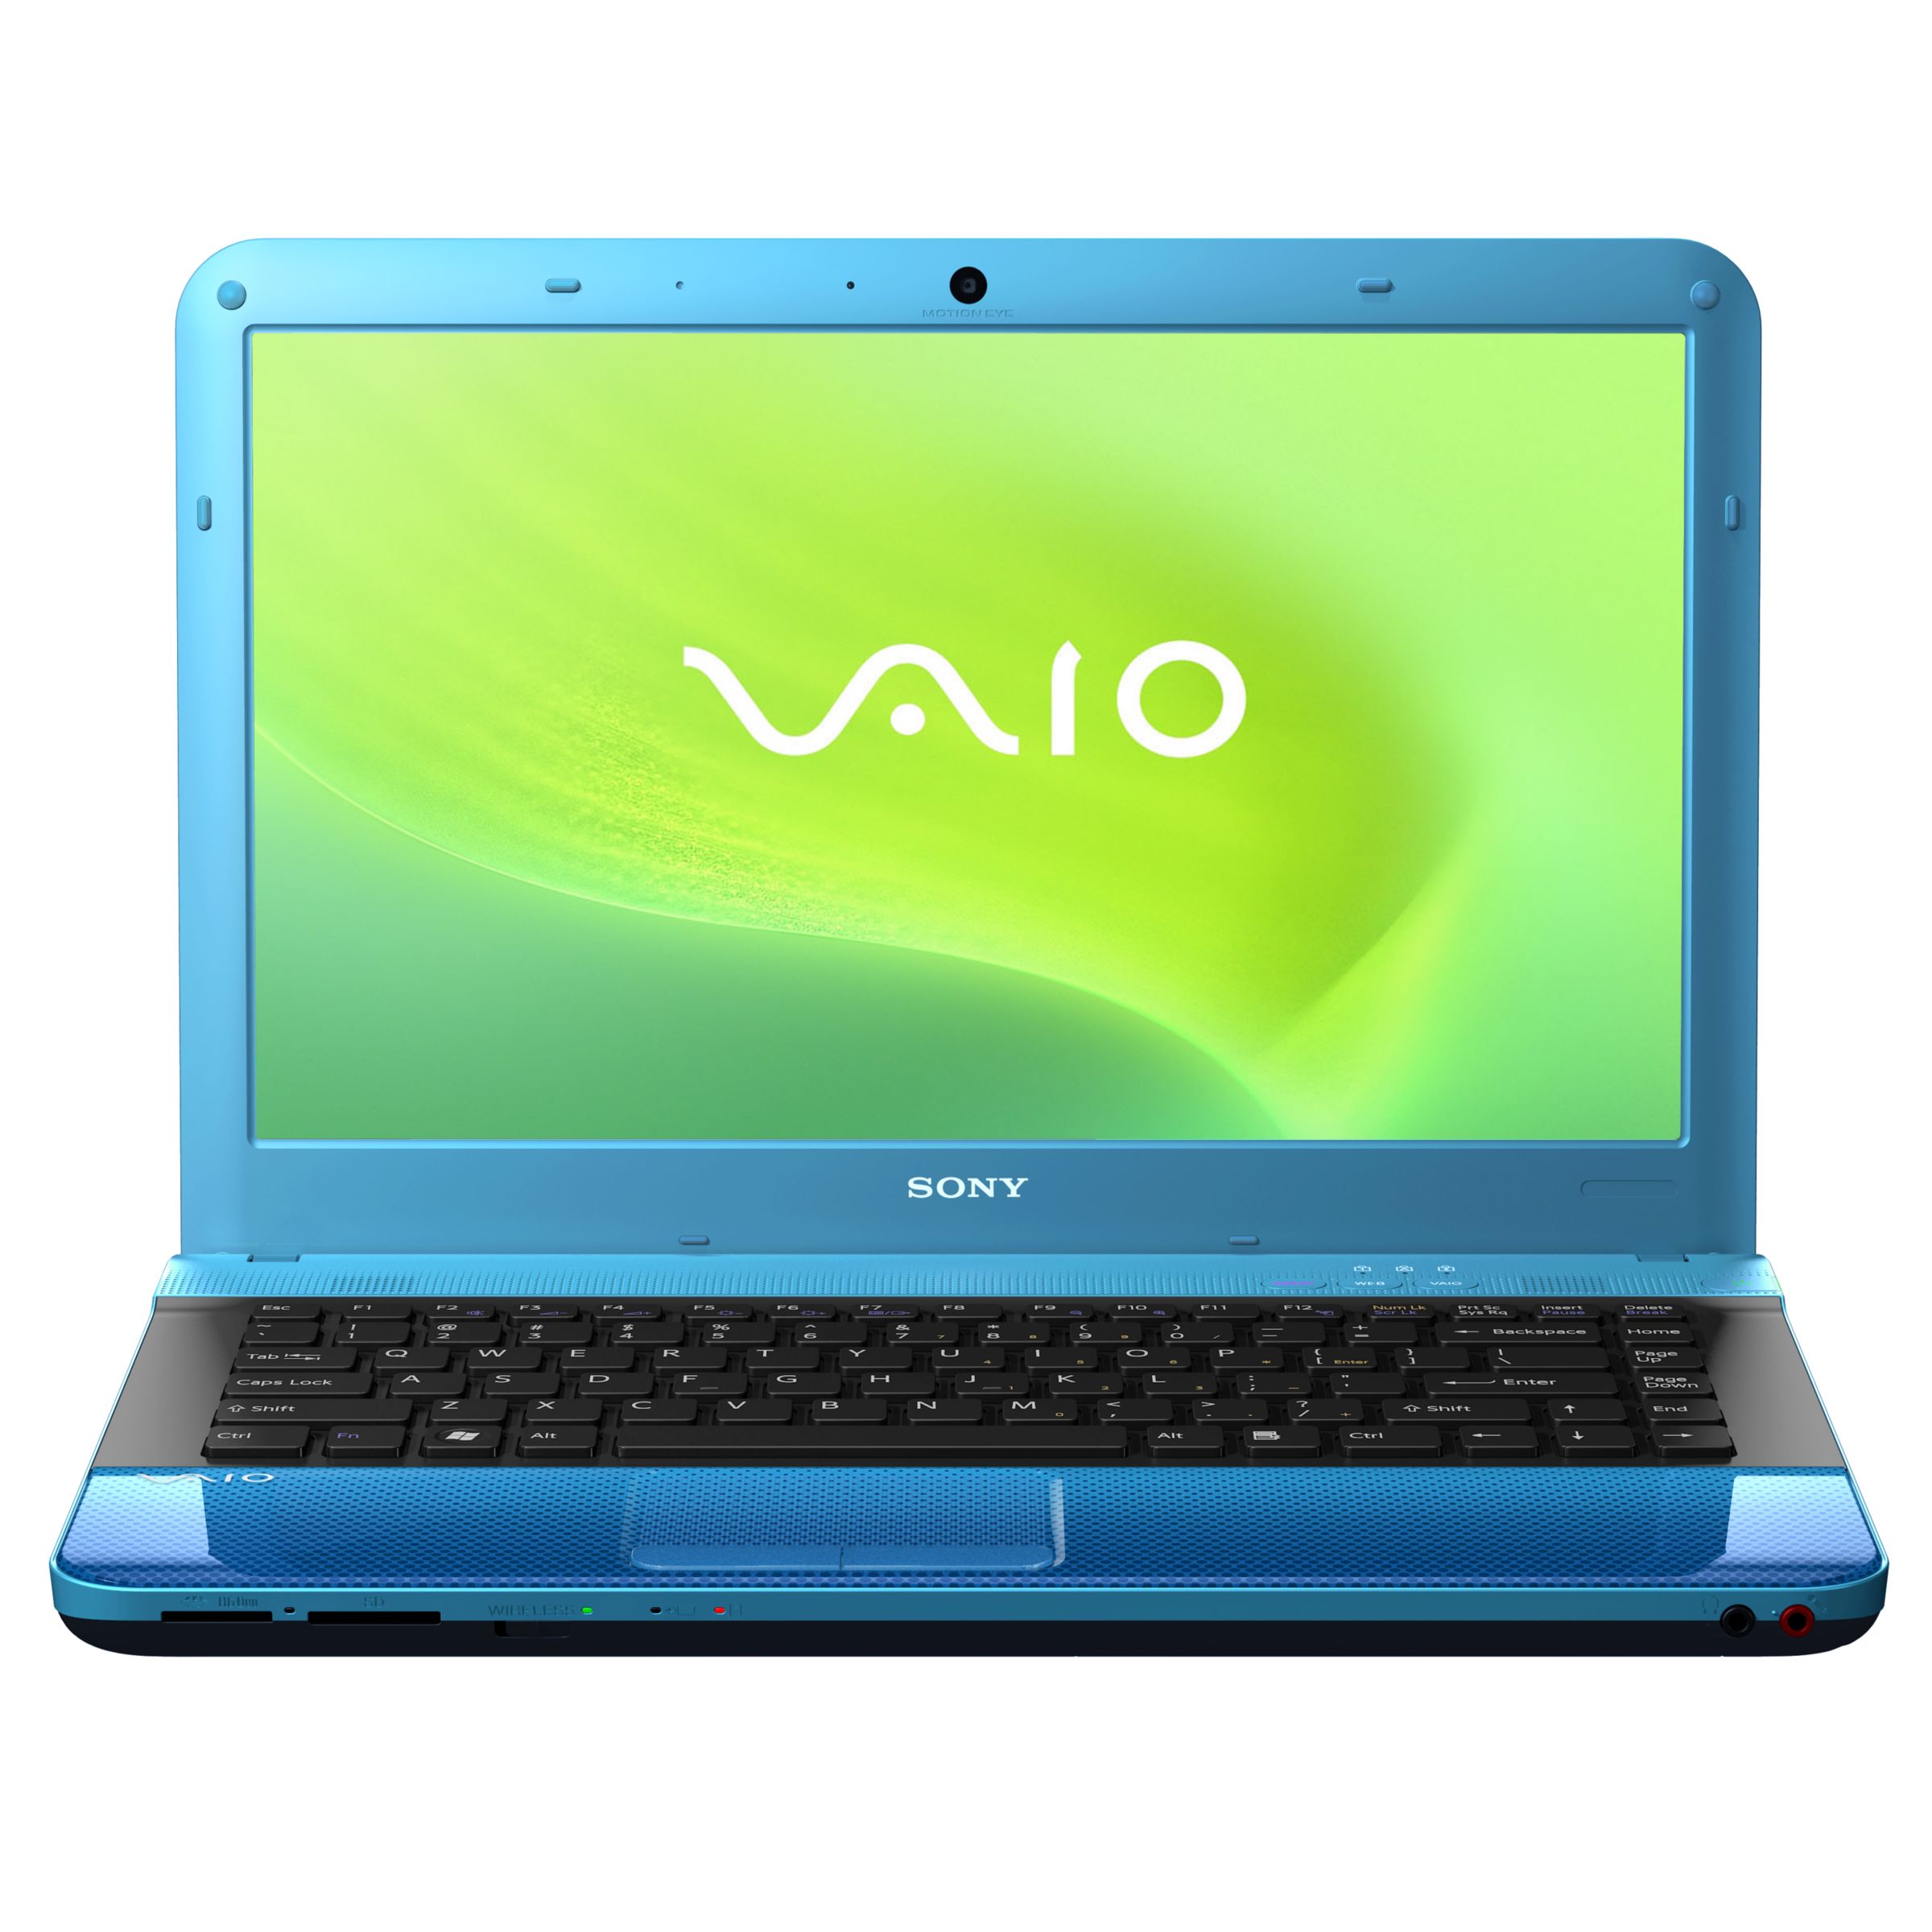 Sony Vaio VPC-EA3S1E/L Laptop, Intel Core i3, 500GB, 2.4GHz with 14 Inch Display, Blue at John Lewis